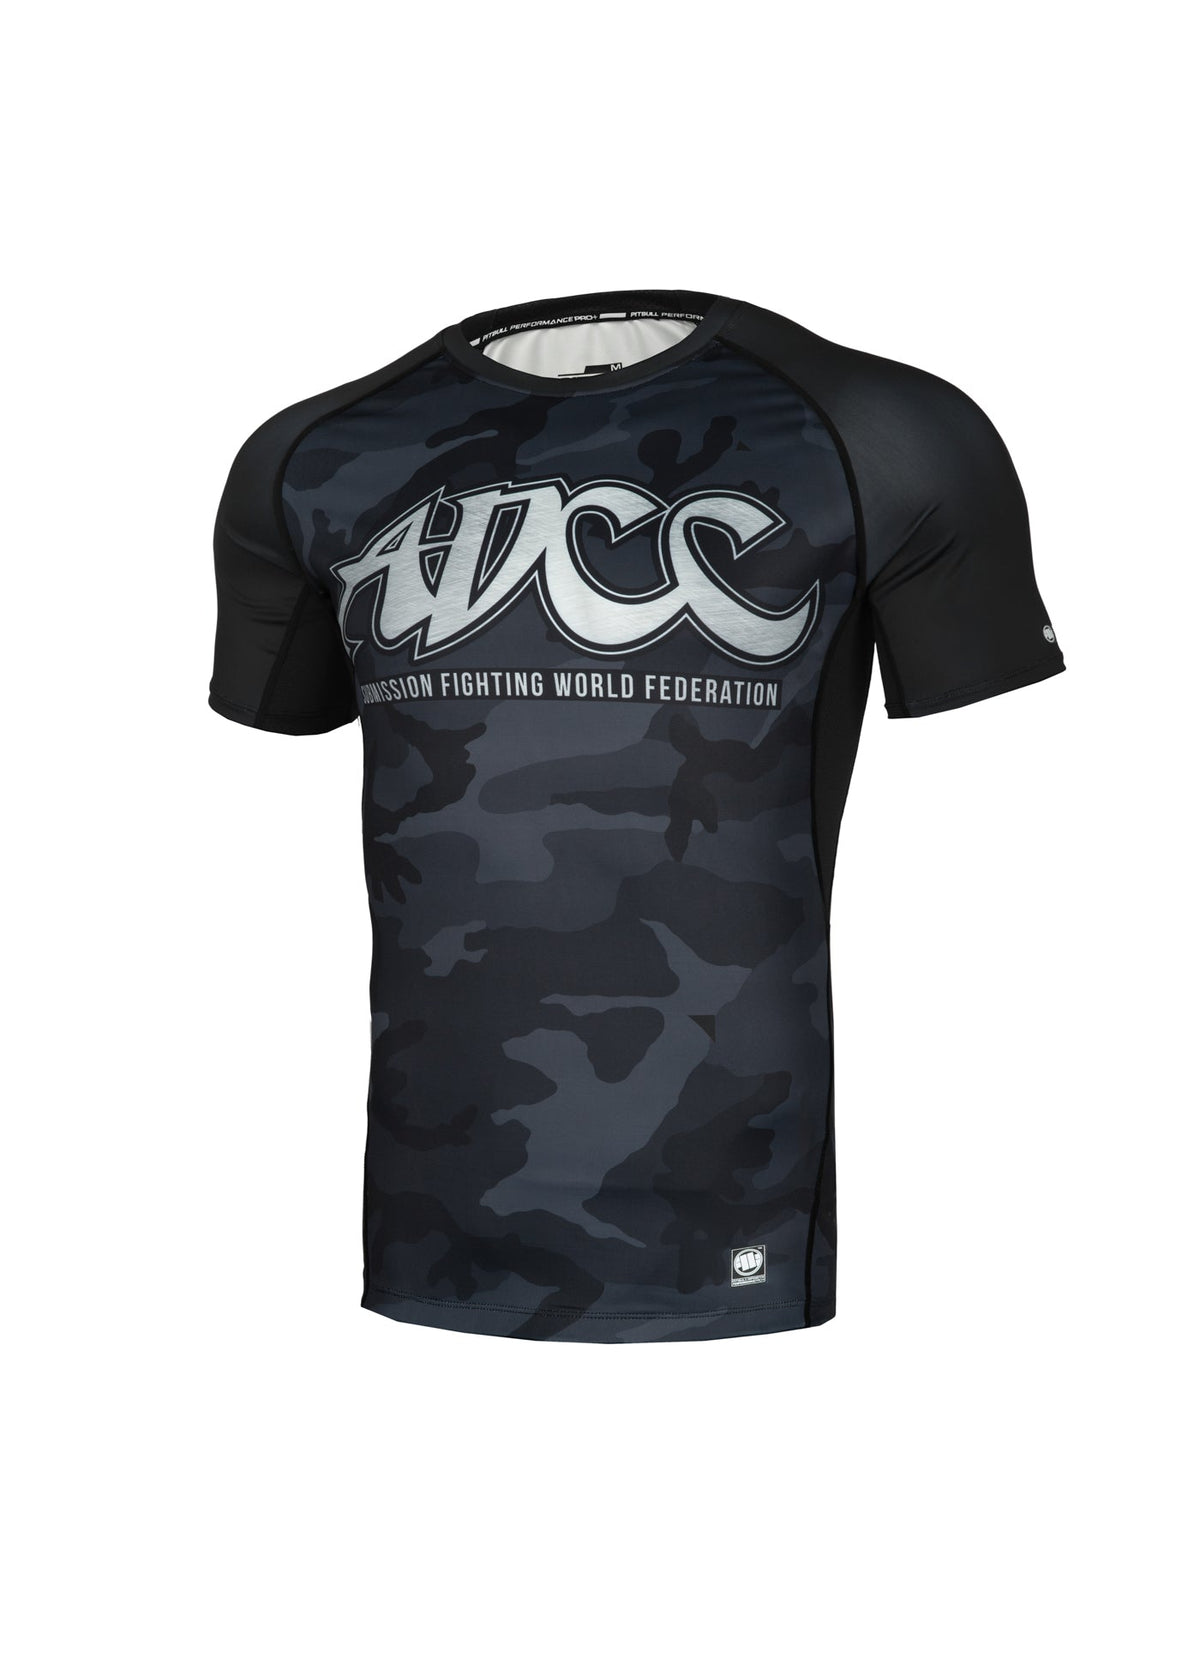 ADCC fitted  All Black Camo Rash Guard